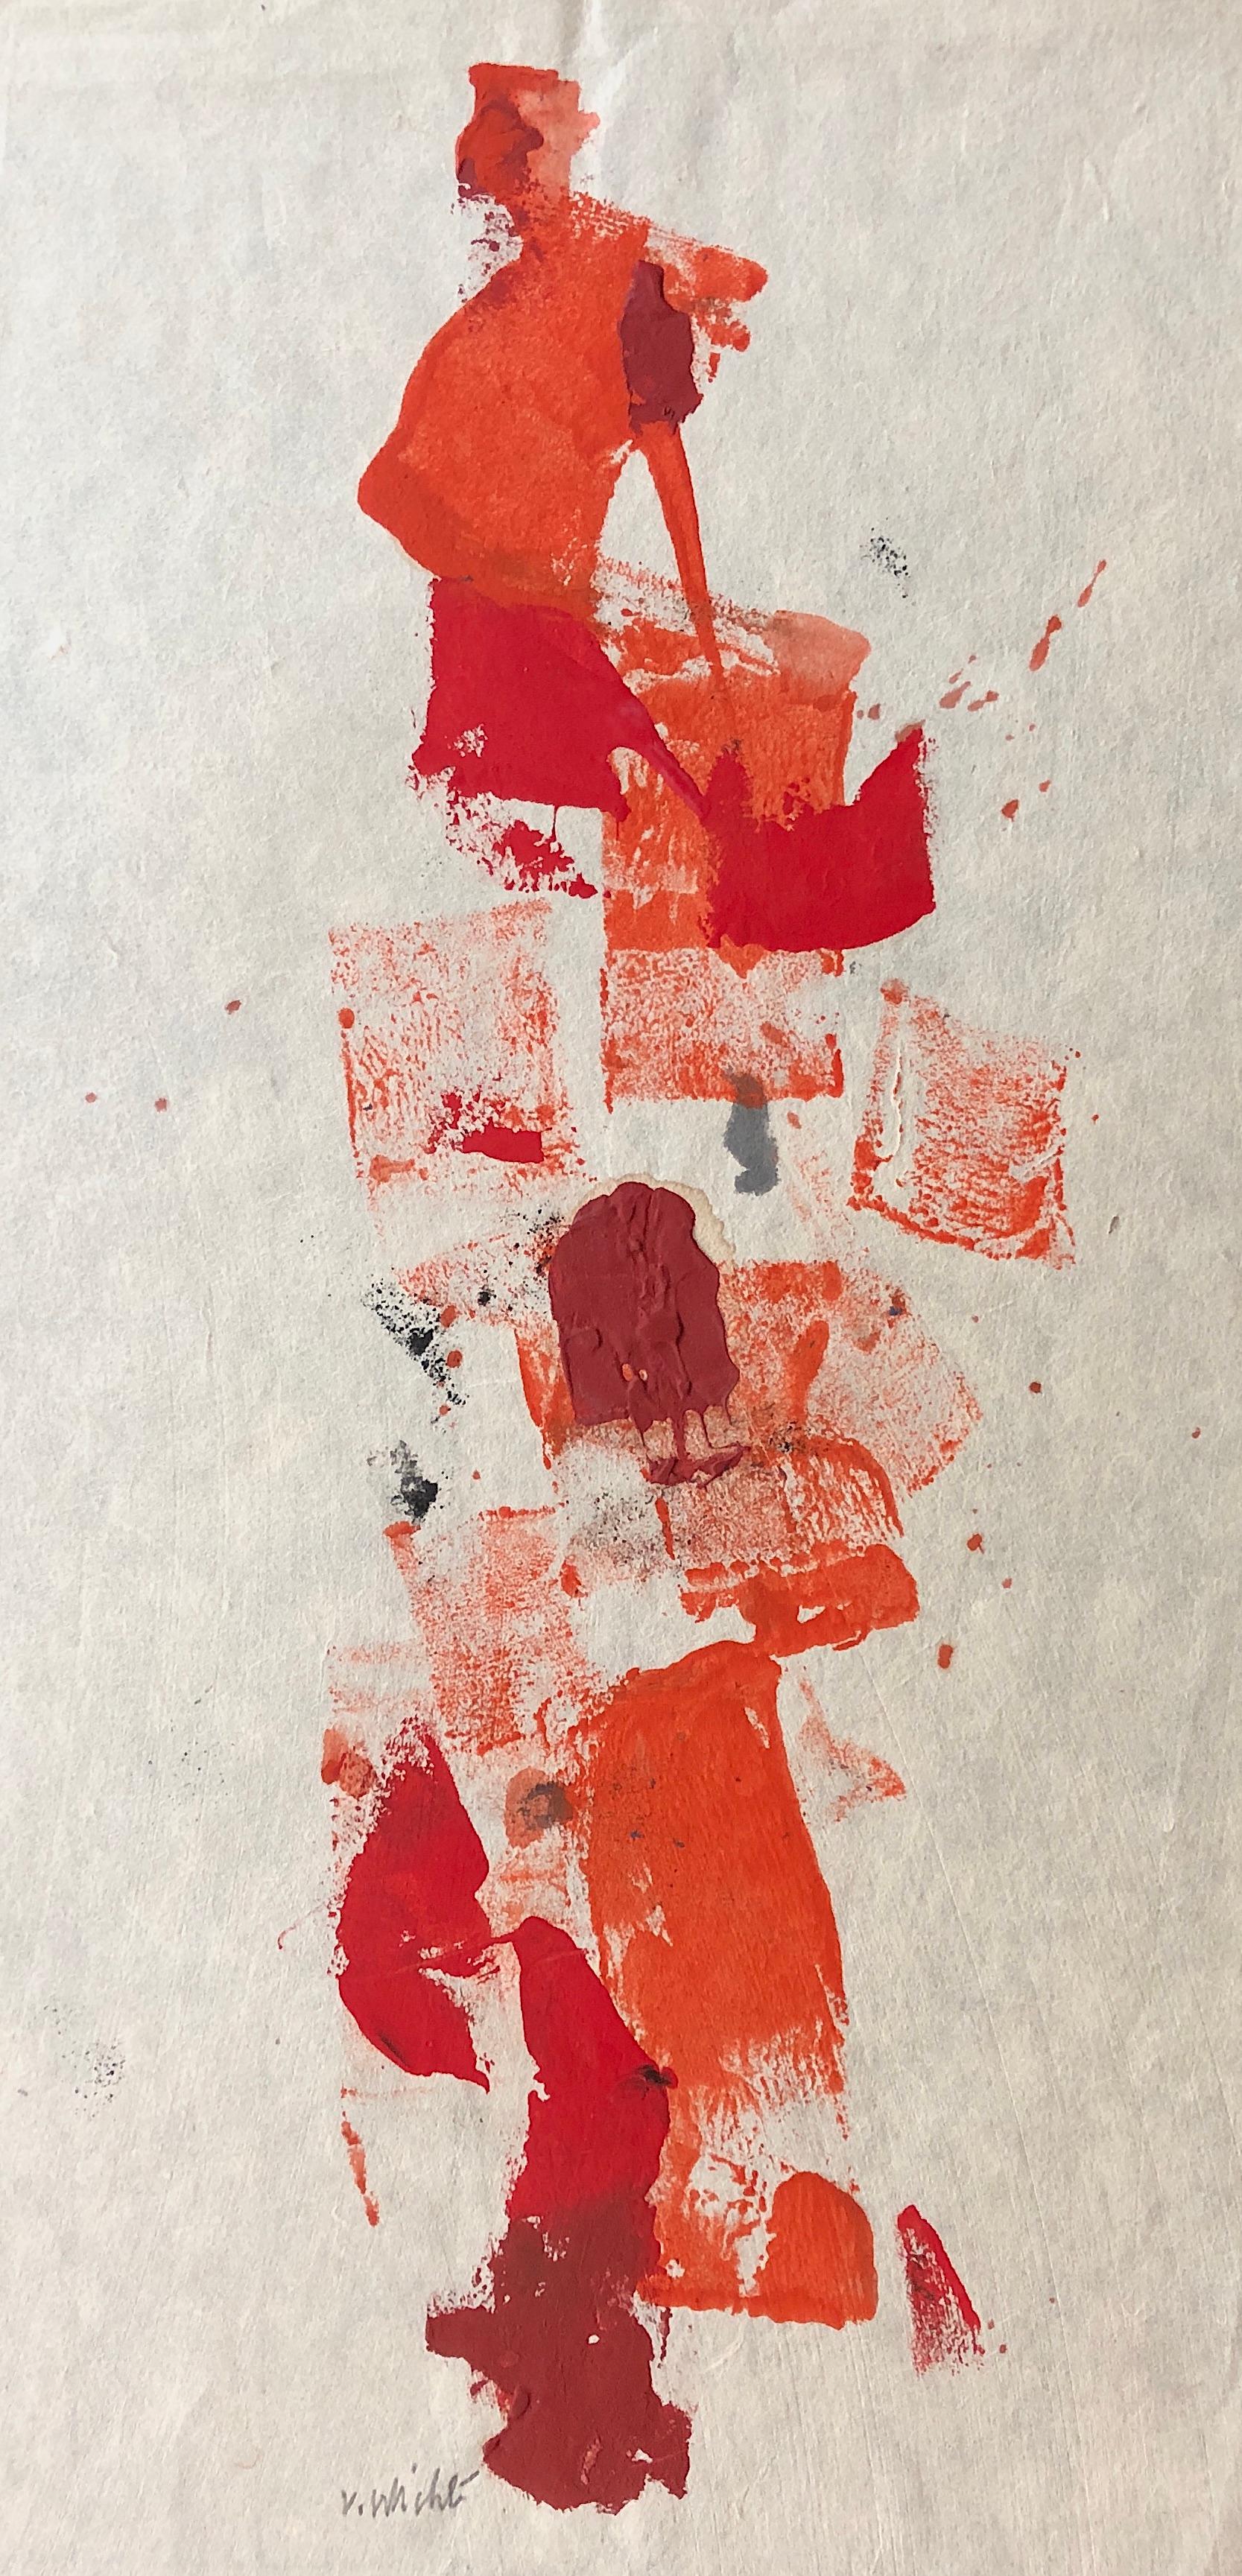 Untitled-009 Abstraction in Reds mixed media painting by John Von Wicht